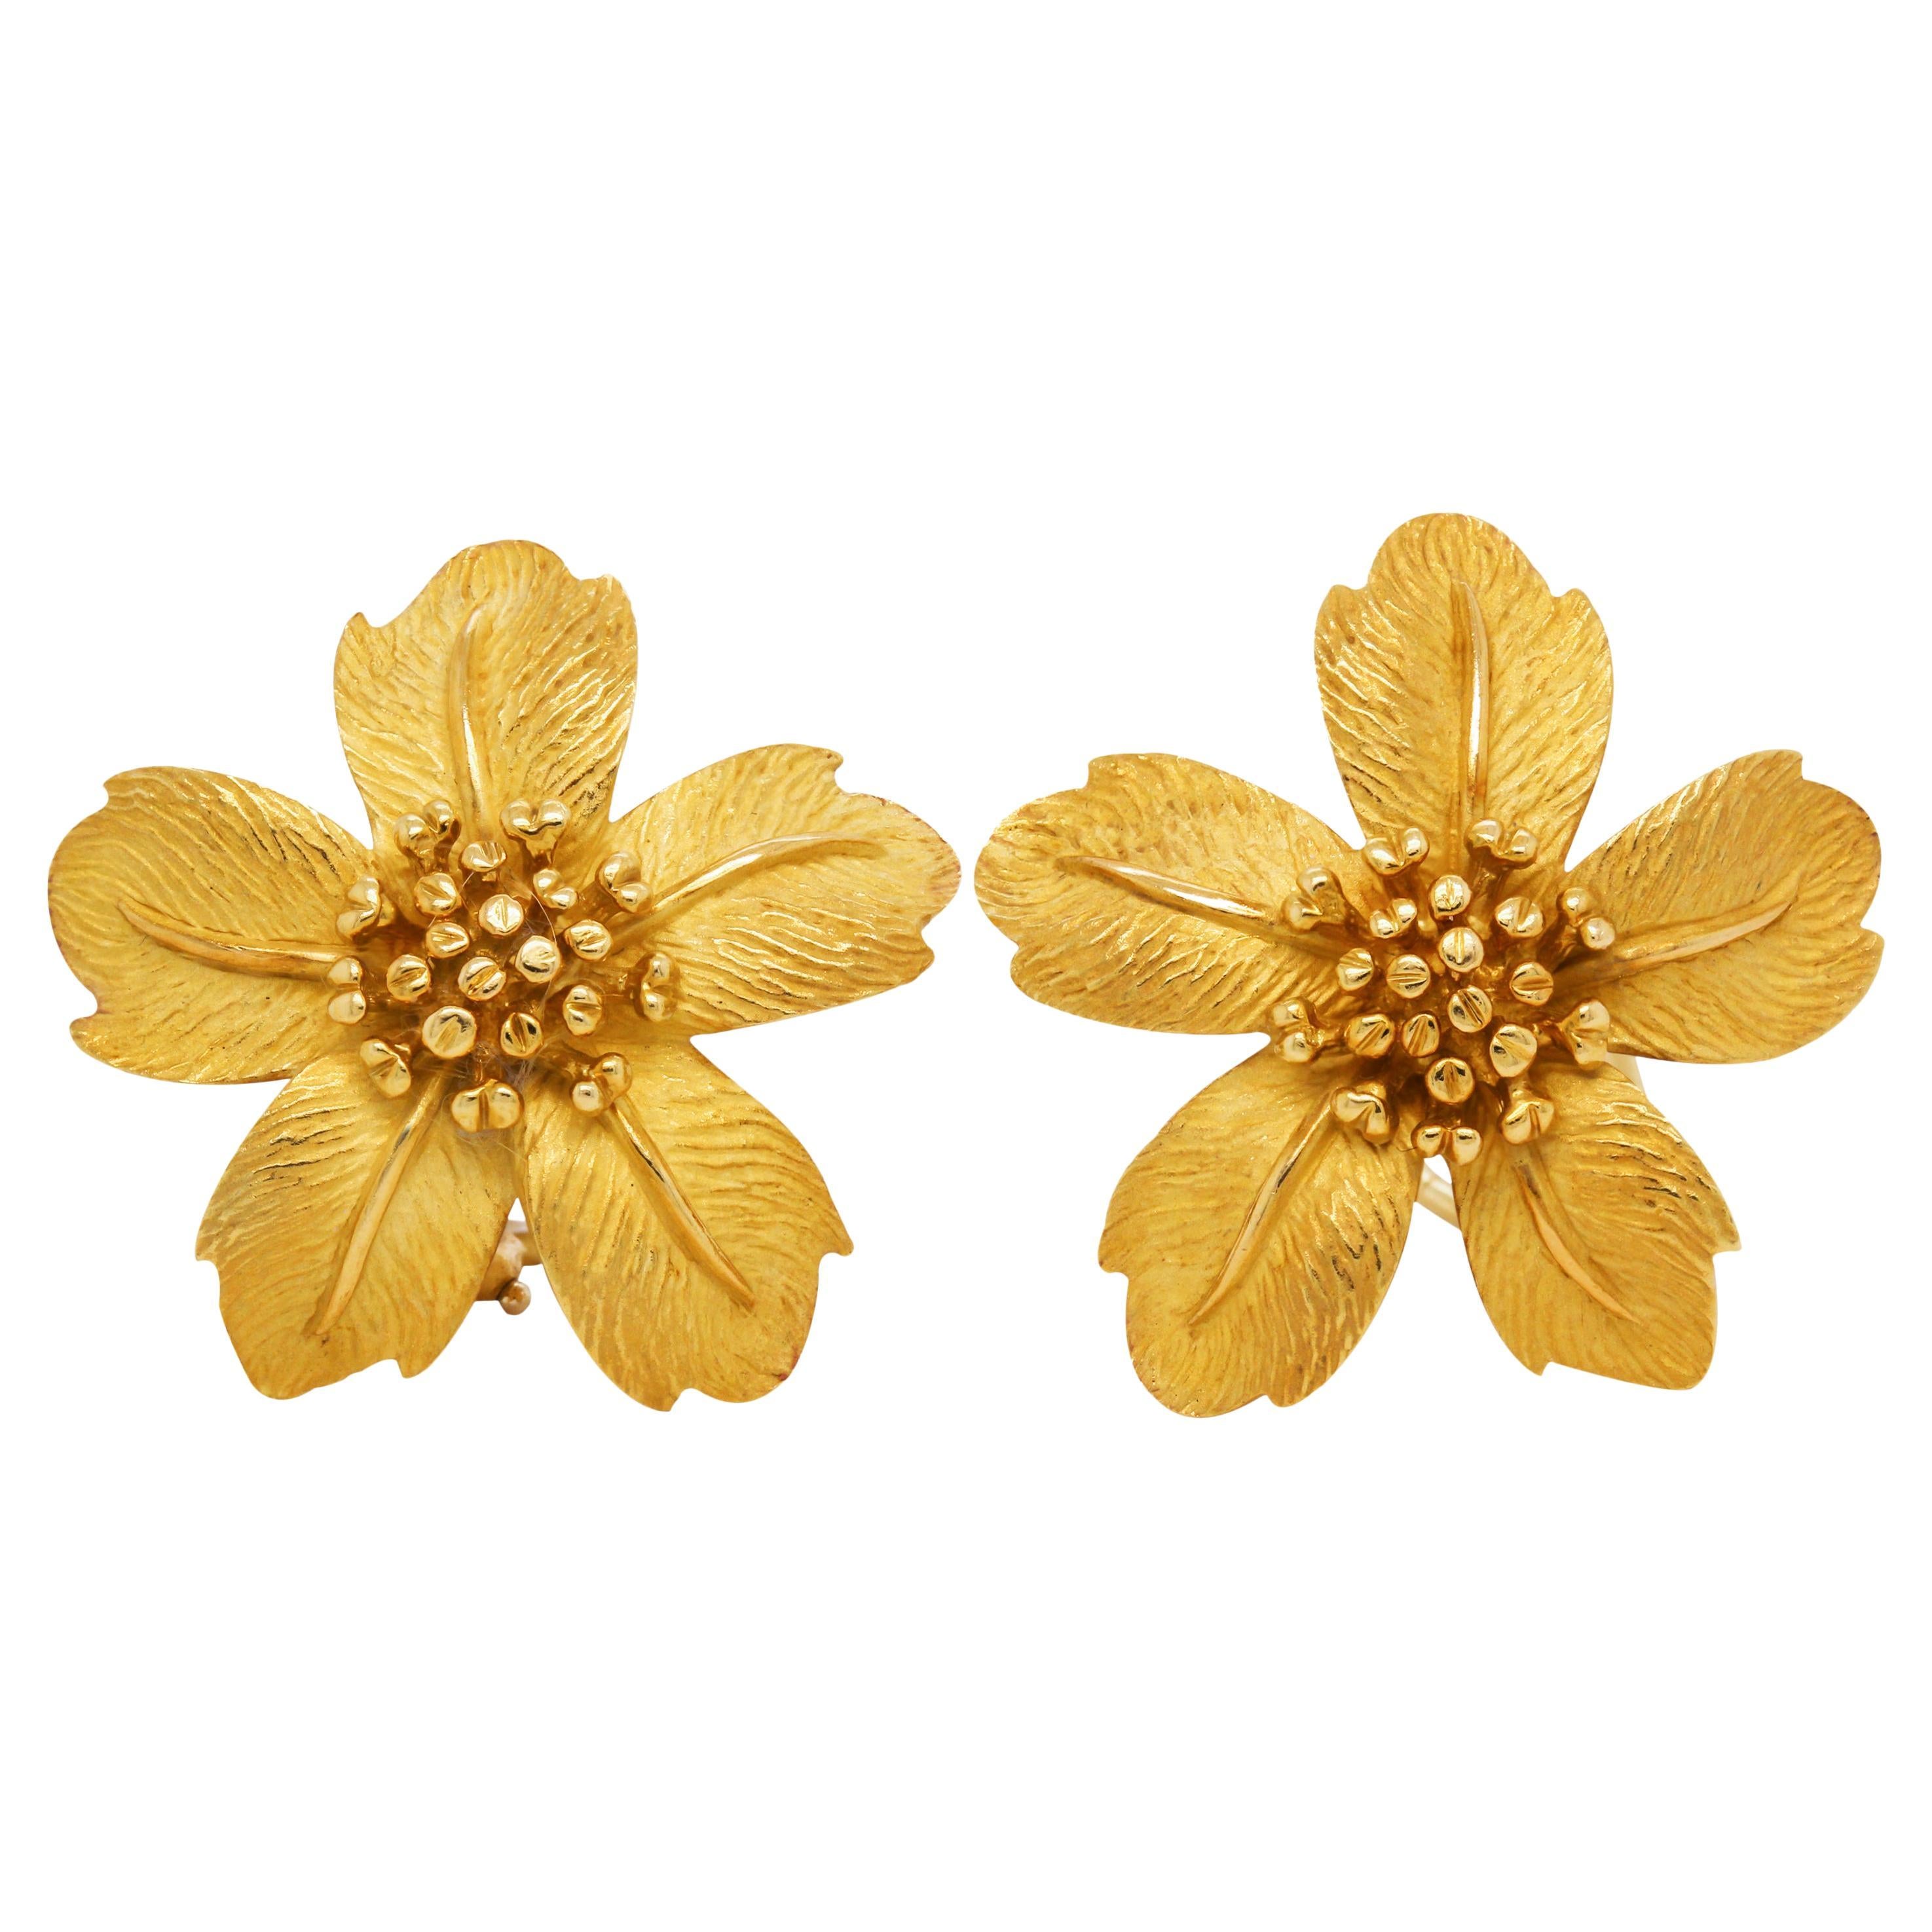 Tiffany & Co. Dogwood Collection 18K Yellow Gold Large Rose Flower Earrings